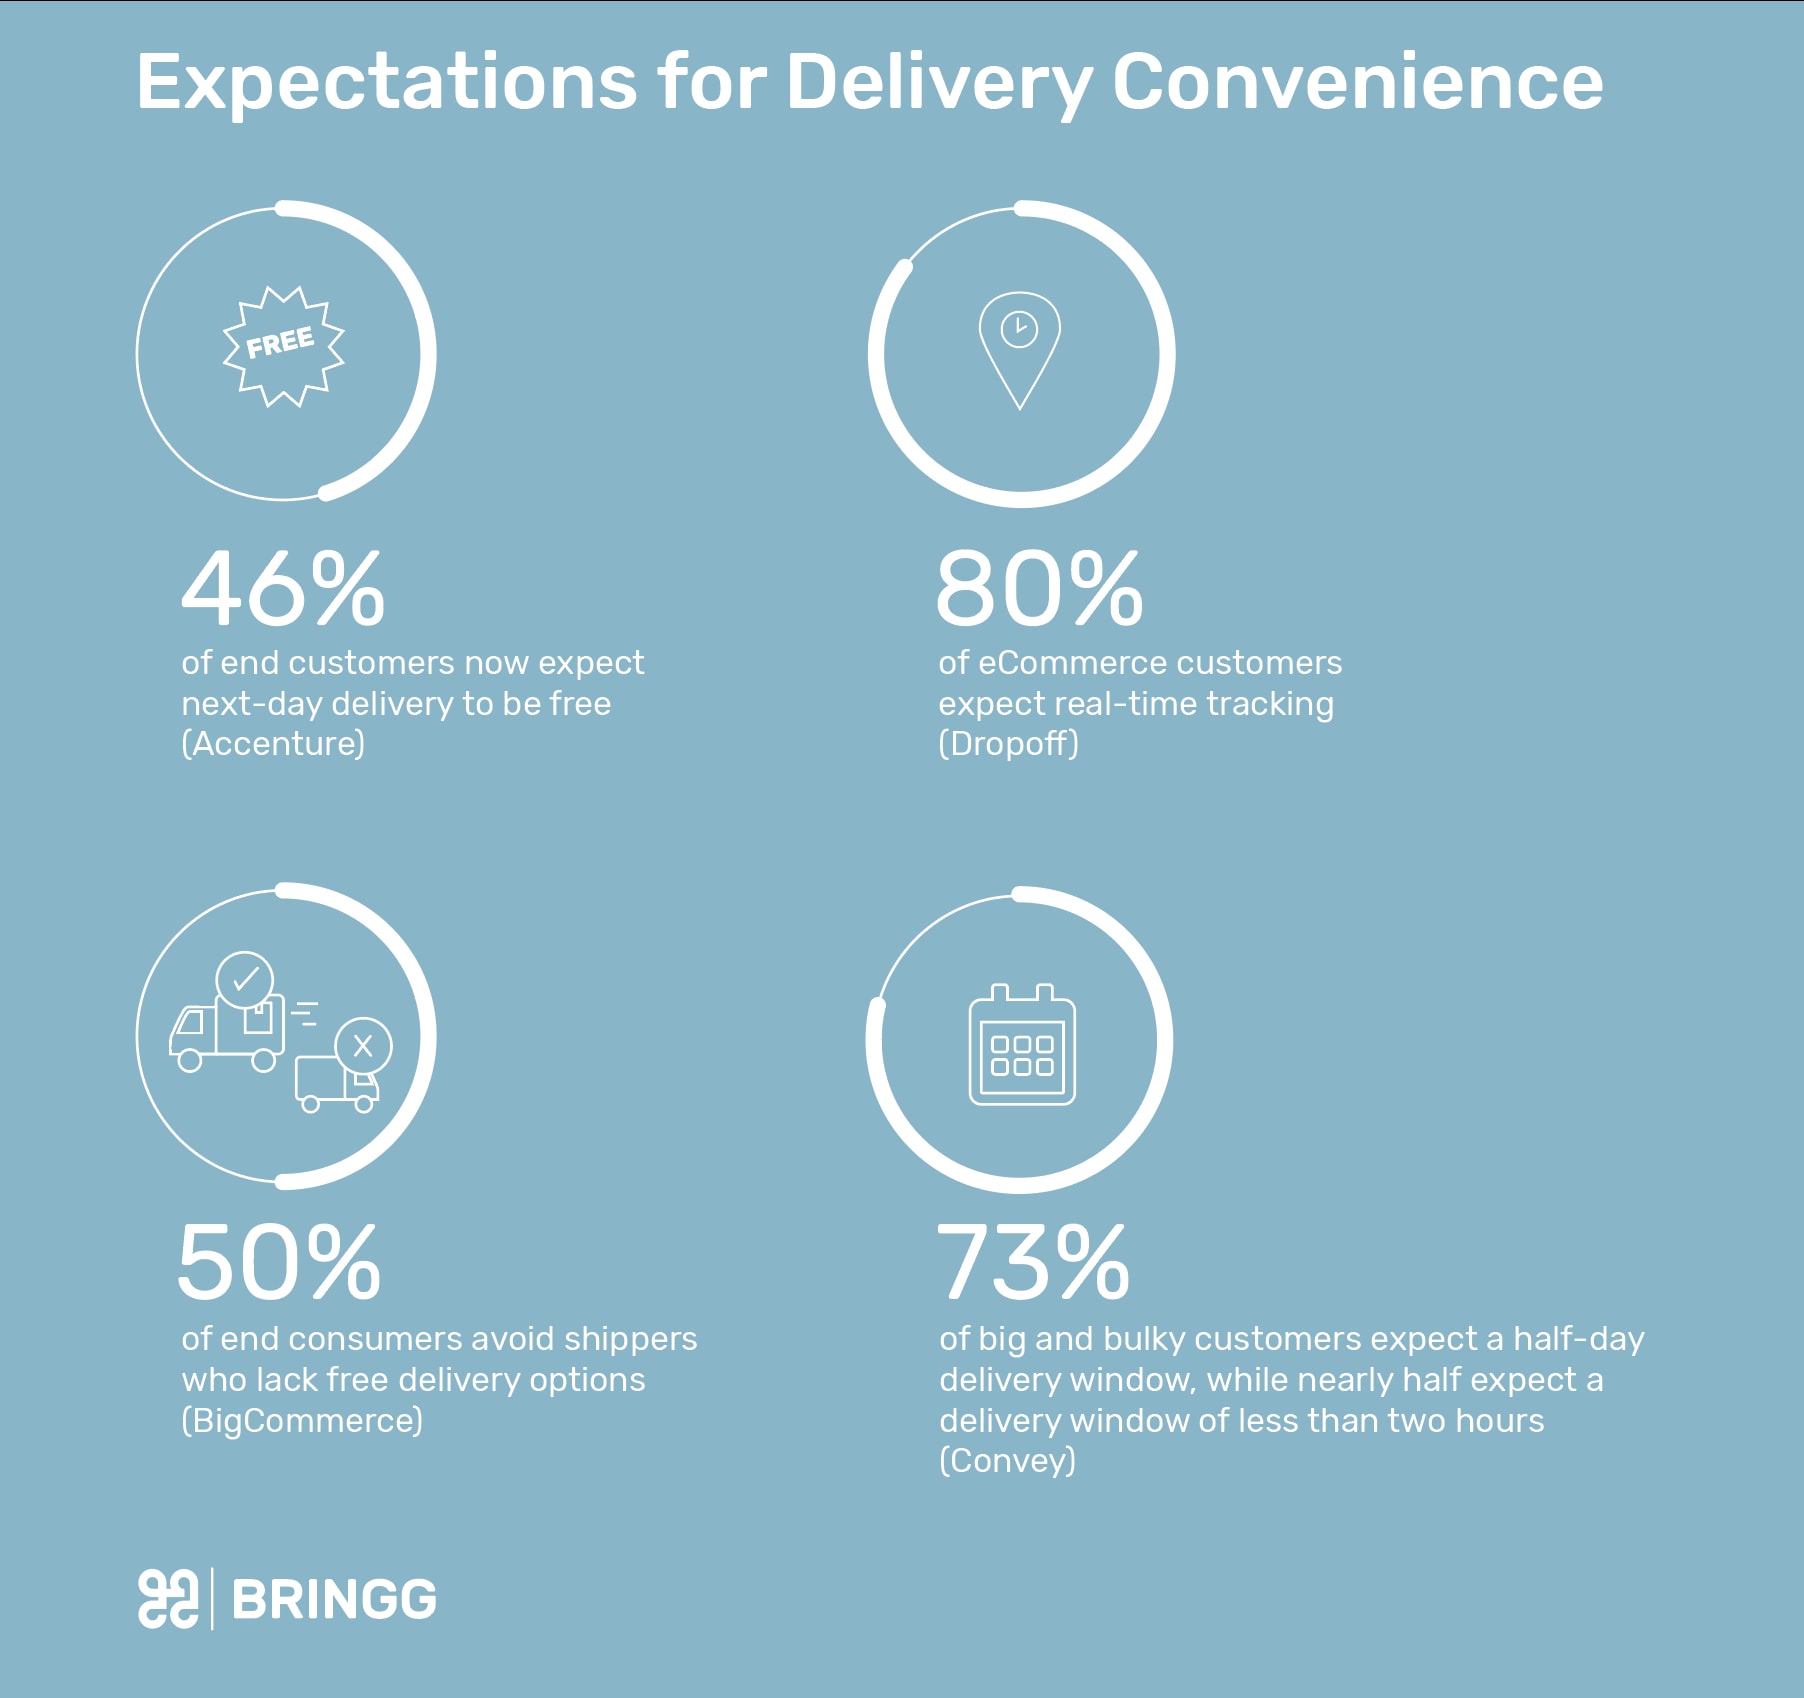 Expectations for Delivery Convenience